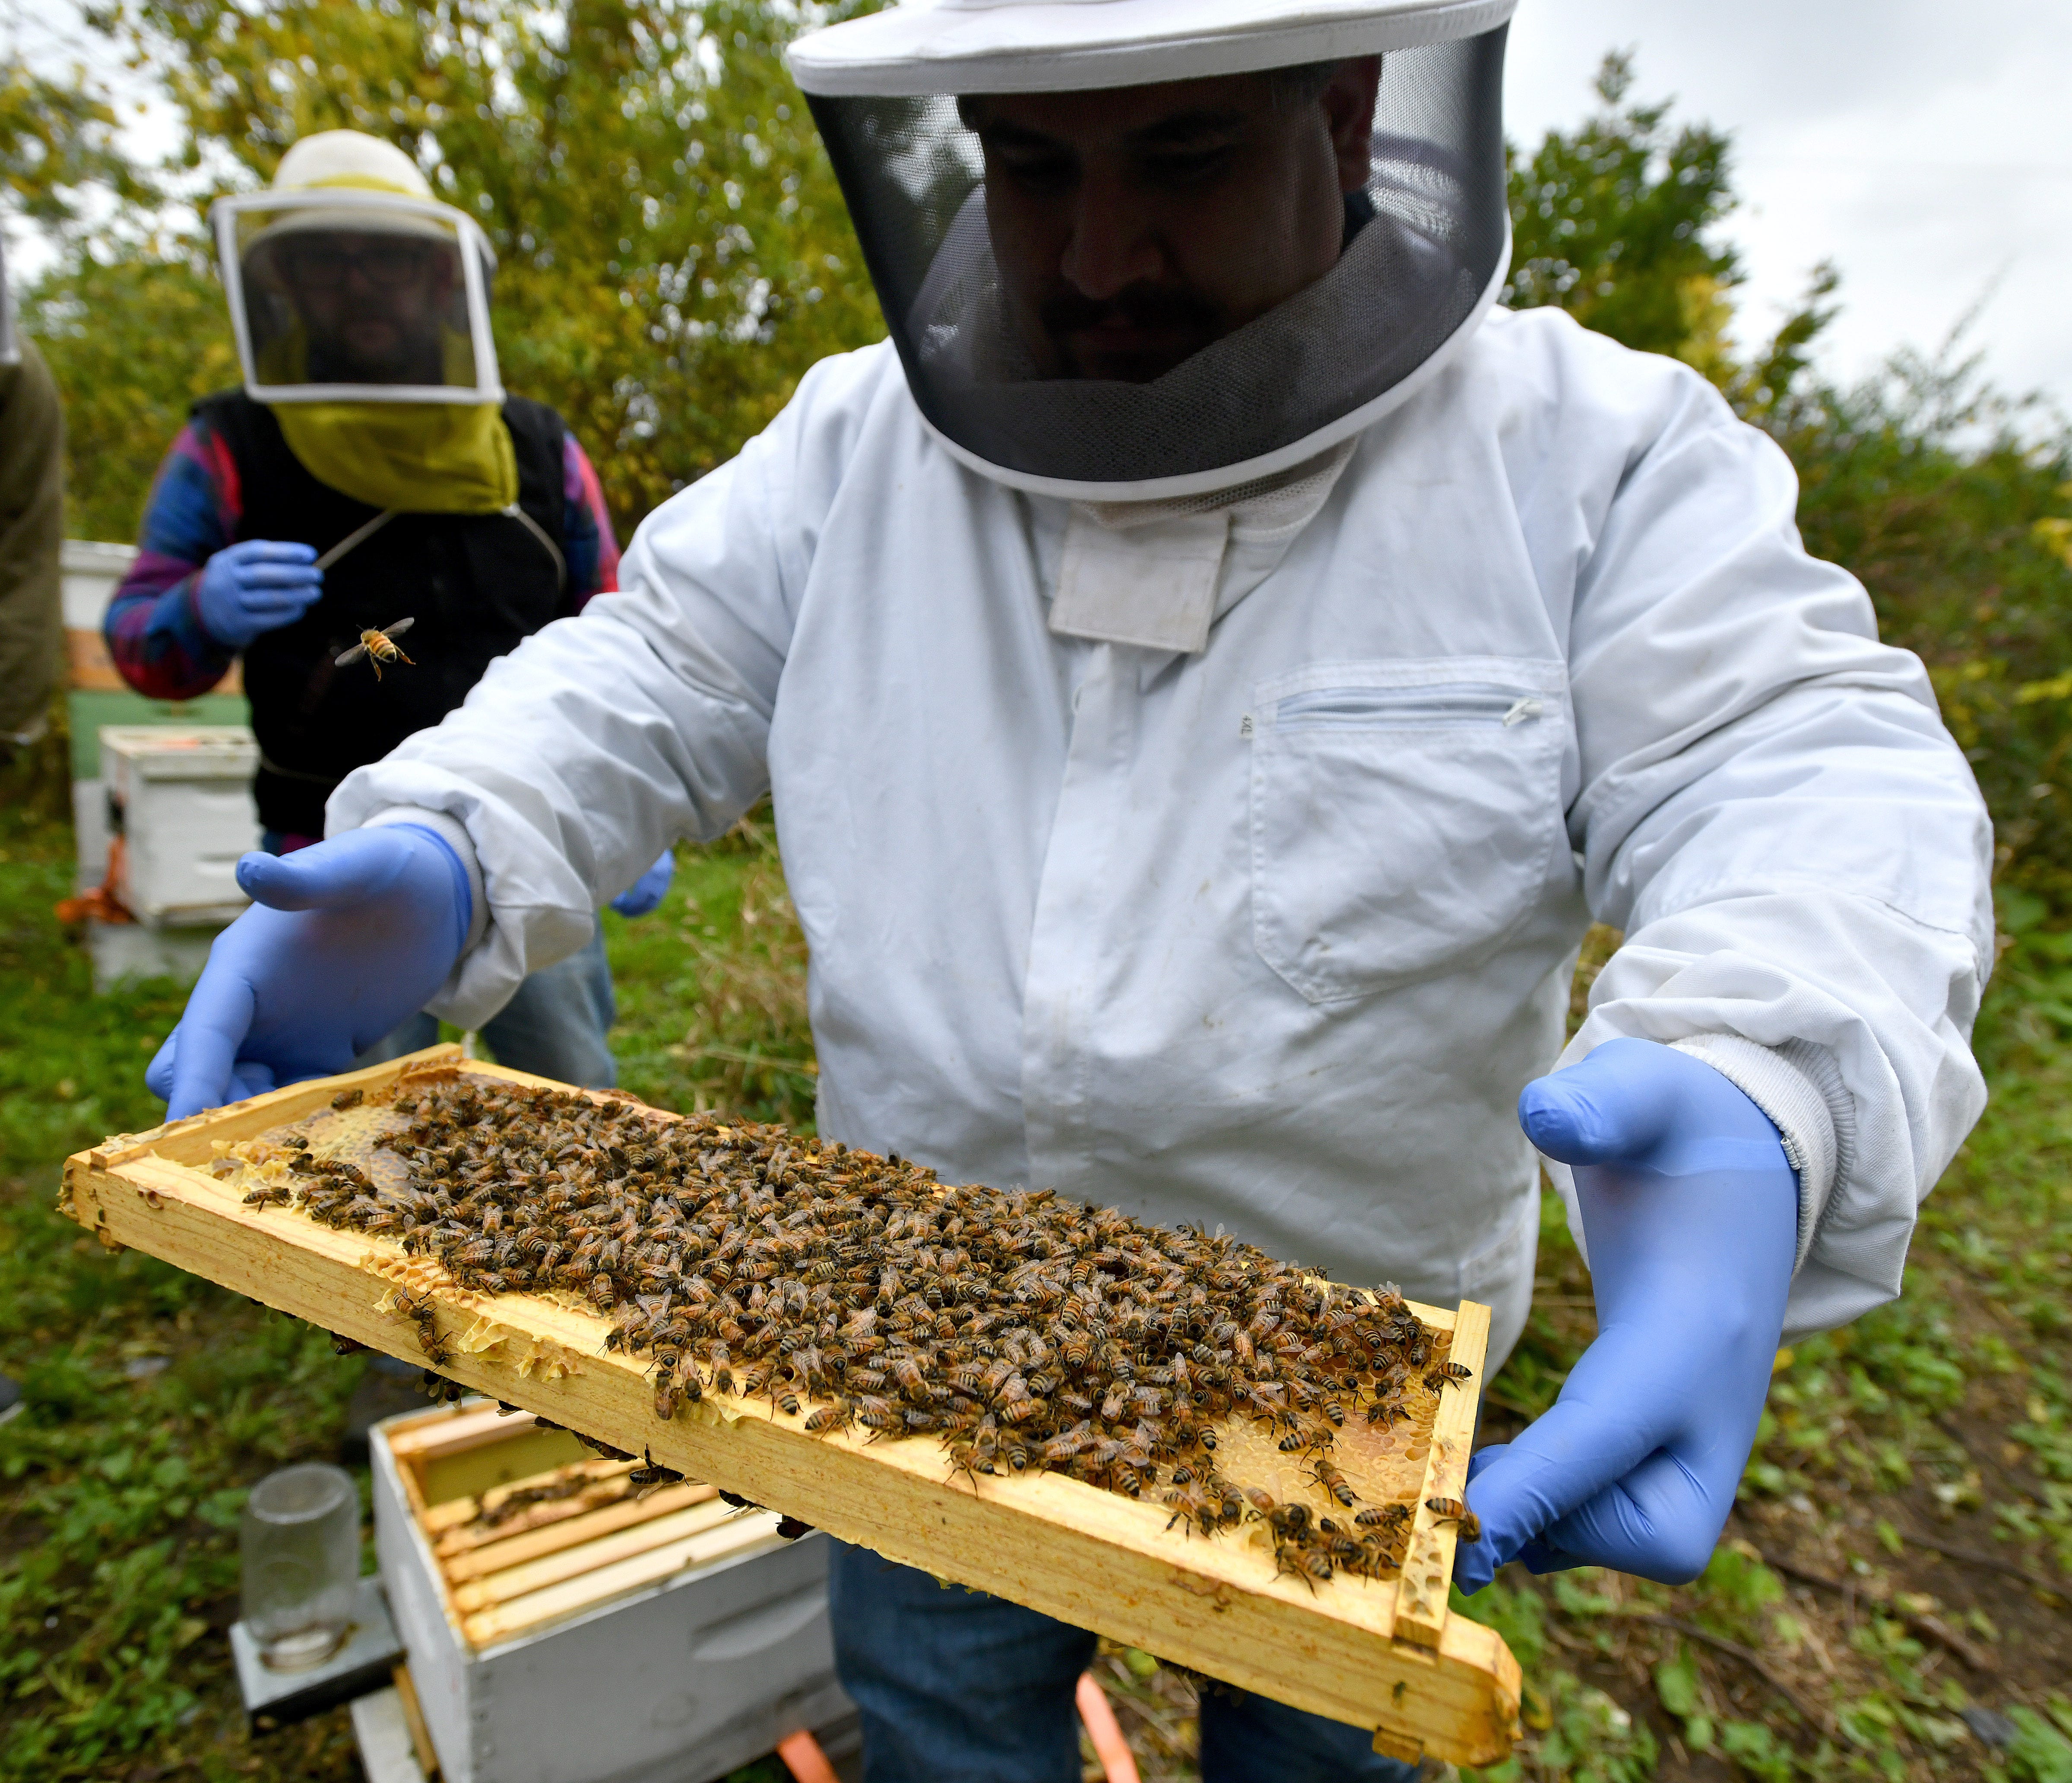 Marine Corps veteran Tom Kusar holds a frame removed from a hive box covered with honey bees. Kusar is being coached by Adam Ingrao (in background), who runs Heroes to Hives, a program that uses beekeeping as a therapeutic and entrepreneurial tool for returning veterans.